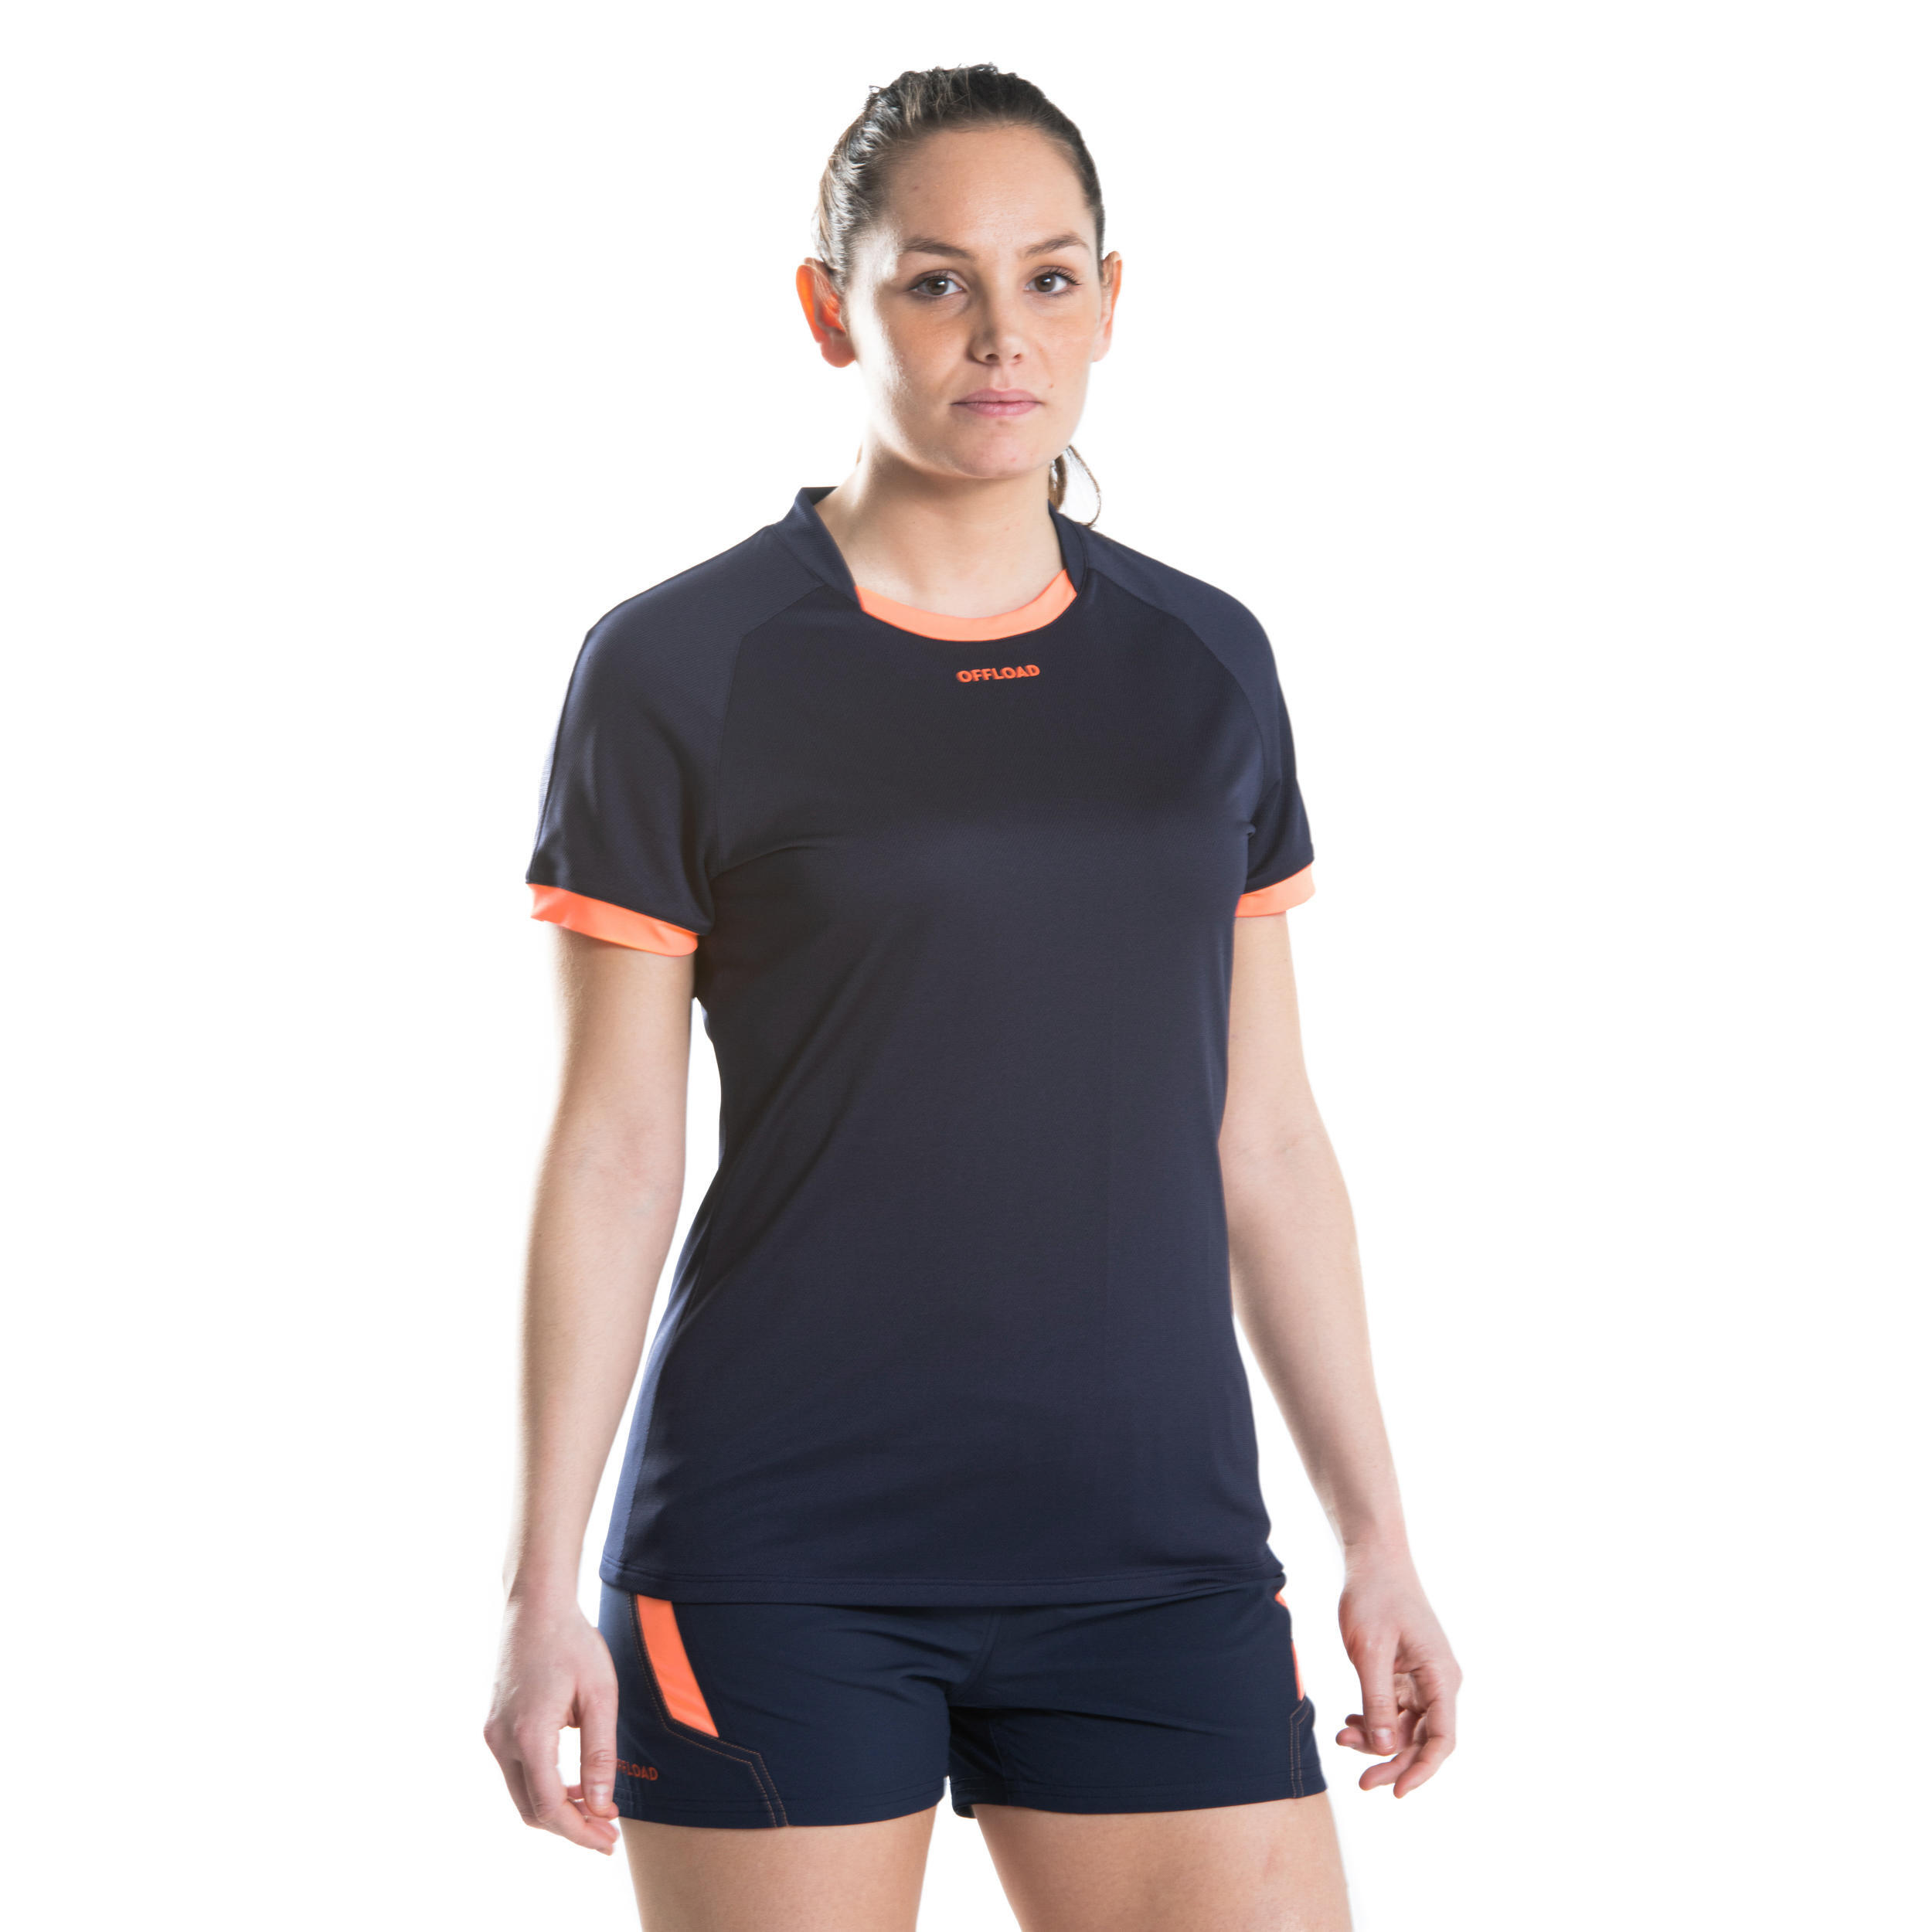 Women's Short-Sleeved Rugby Jersey R100 - Navy Blue/Coral 4/7